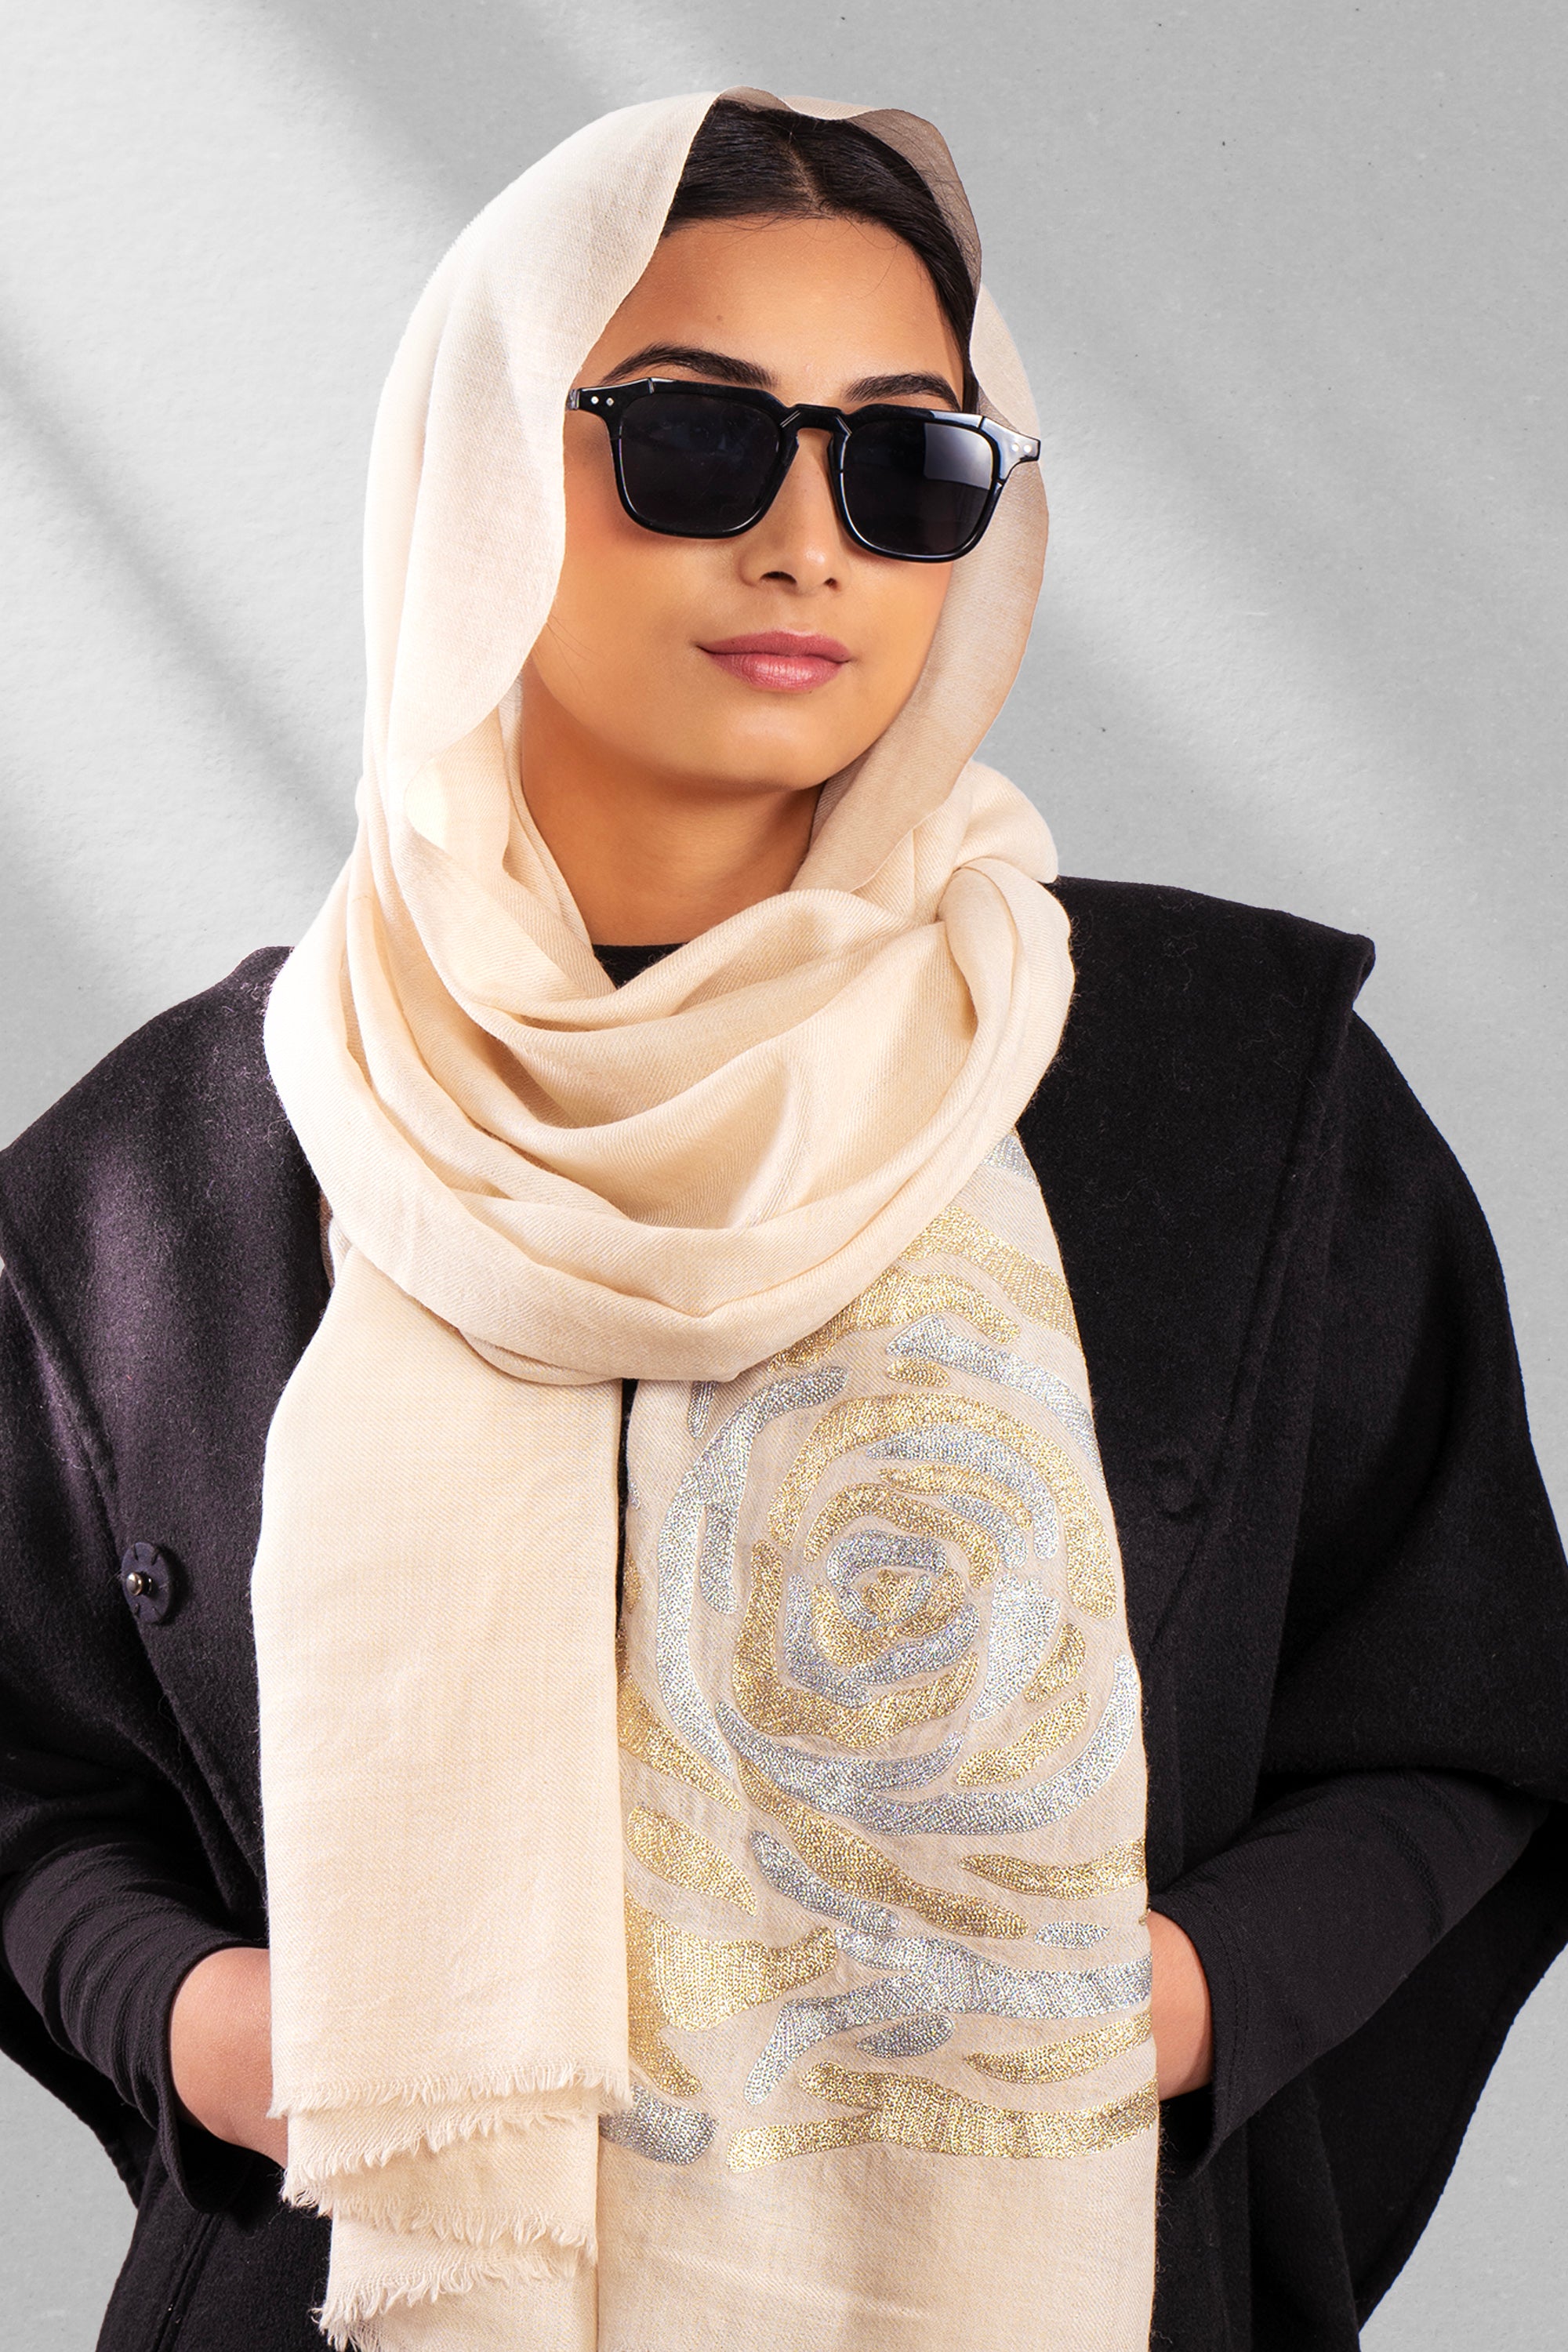 Have a Rosey Day in Pashmina (Beige)